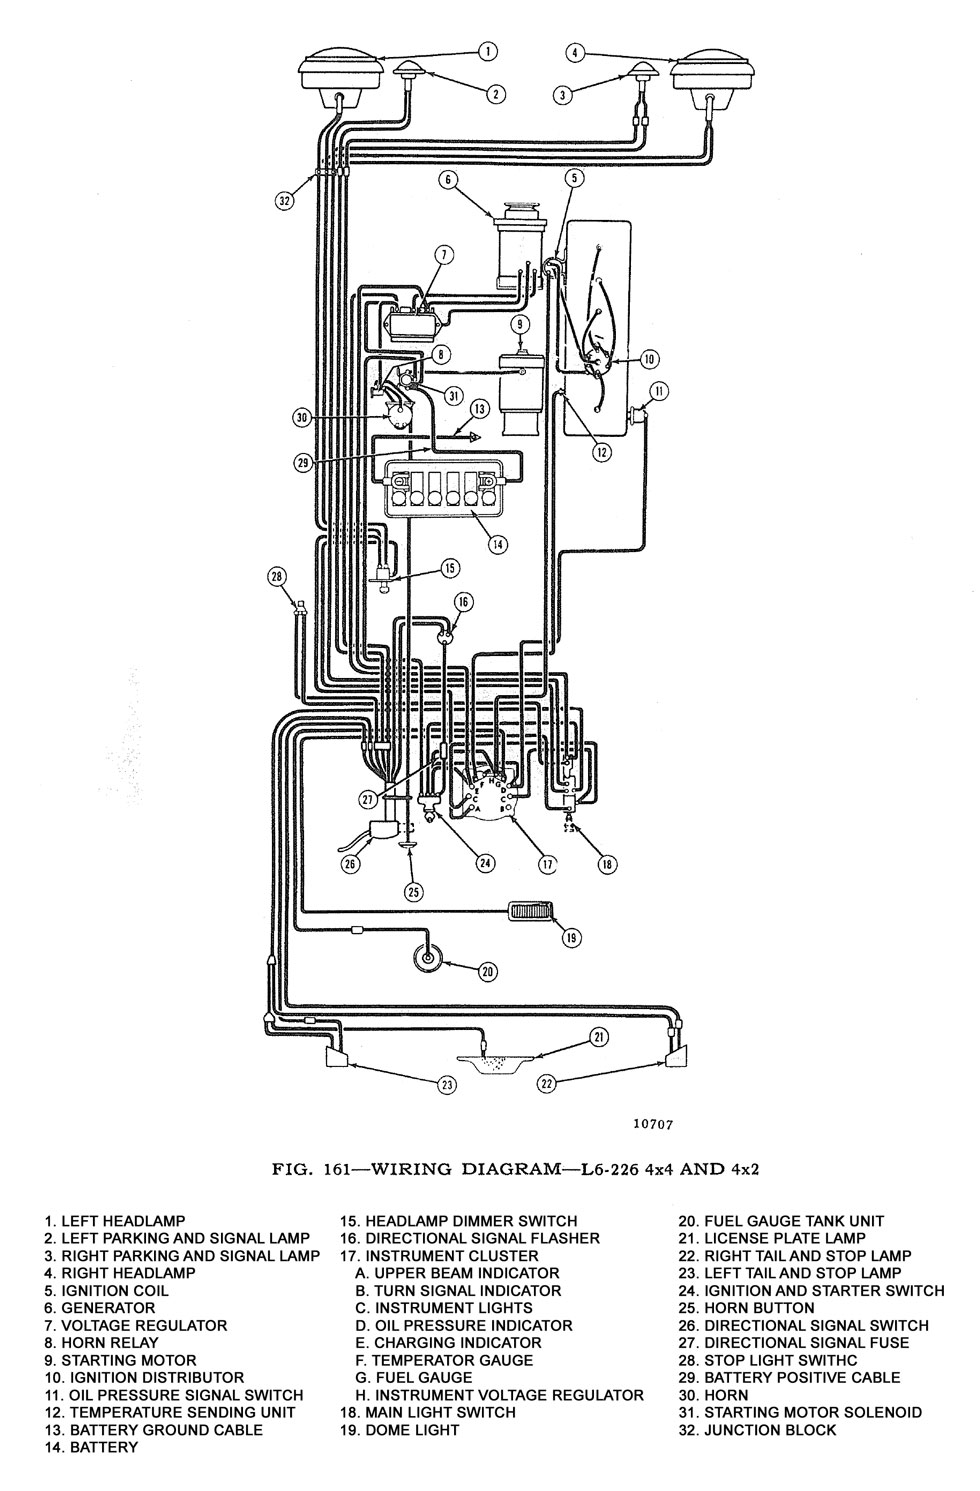 Wiring Diagram - L6-226 4x4 and 4x2